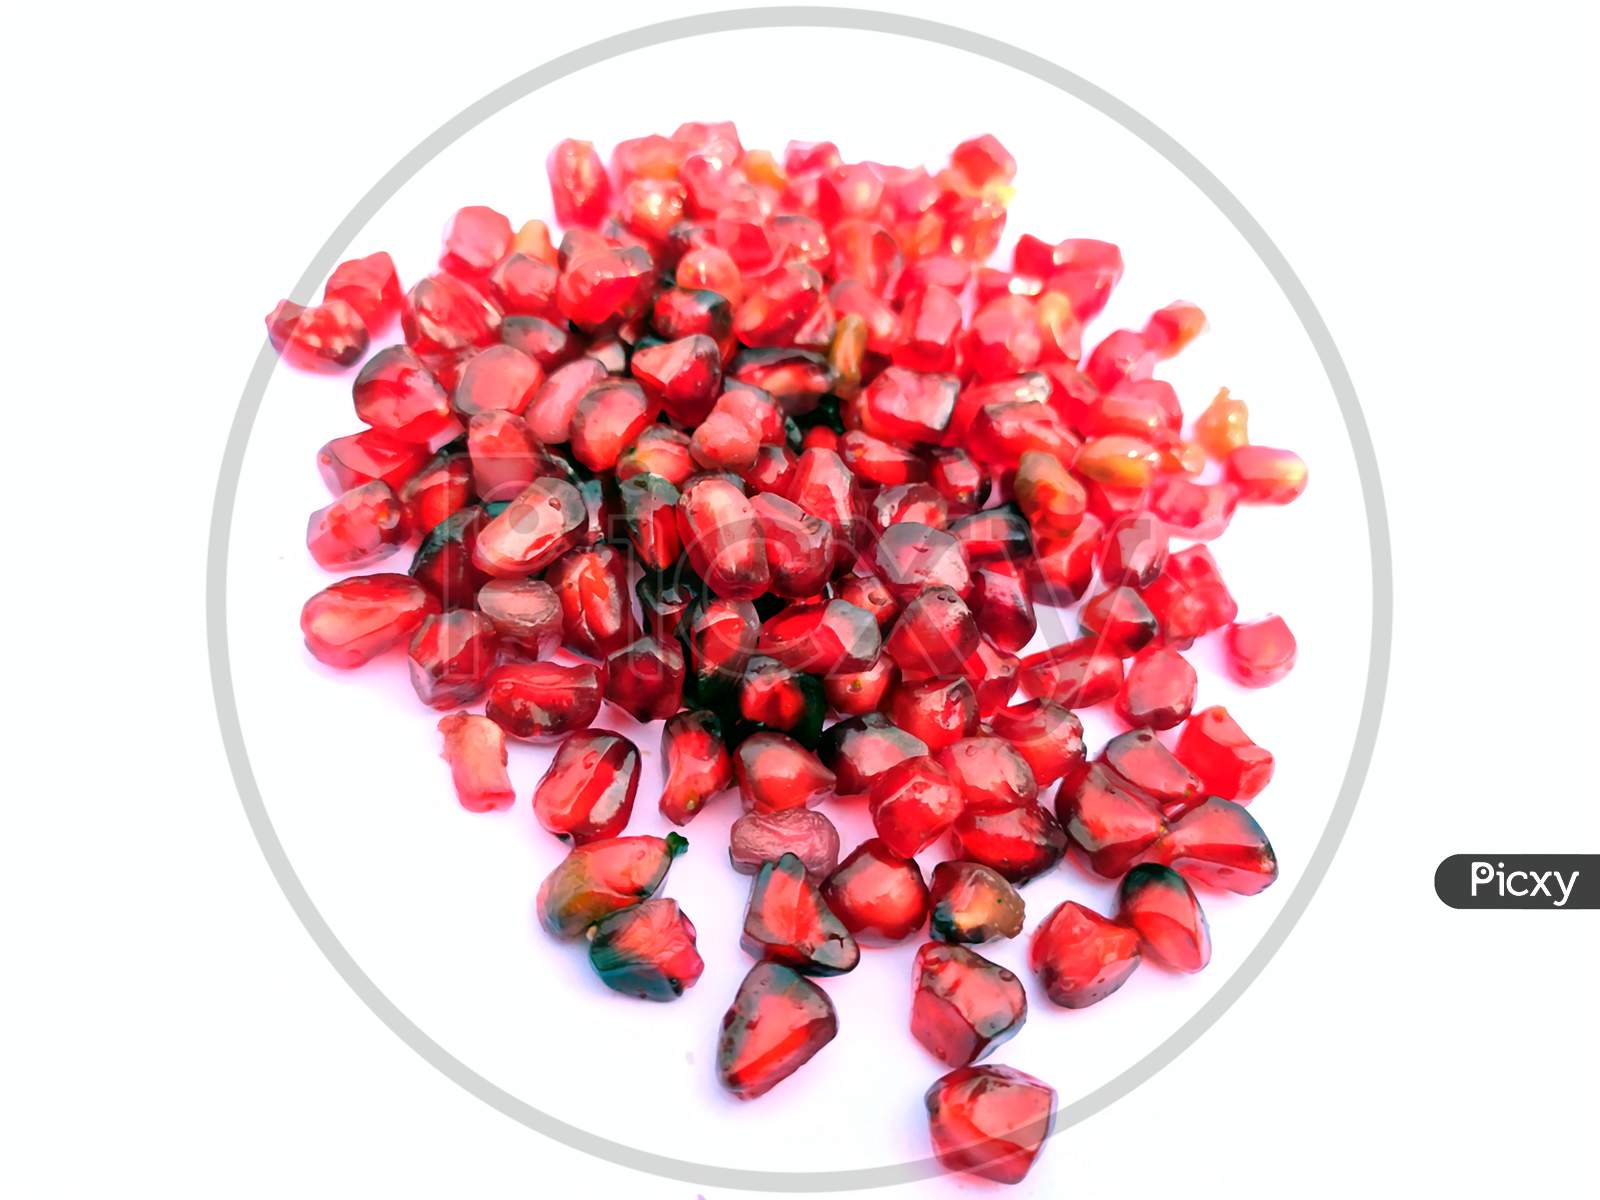 fresh red pomegranate seed isolated on white background